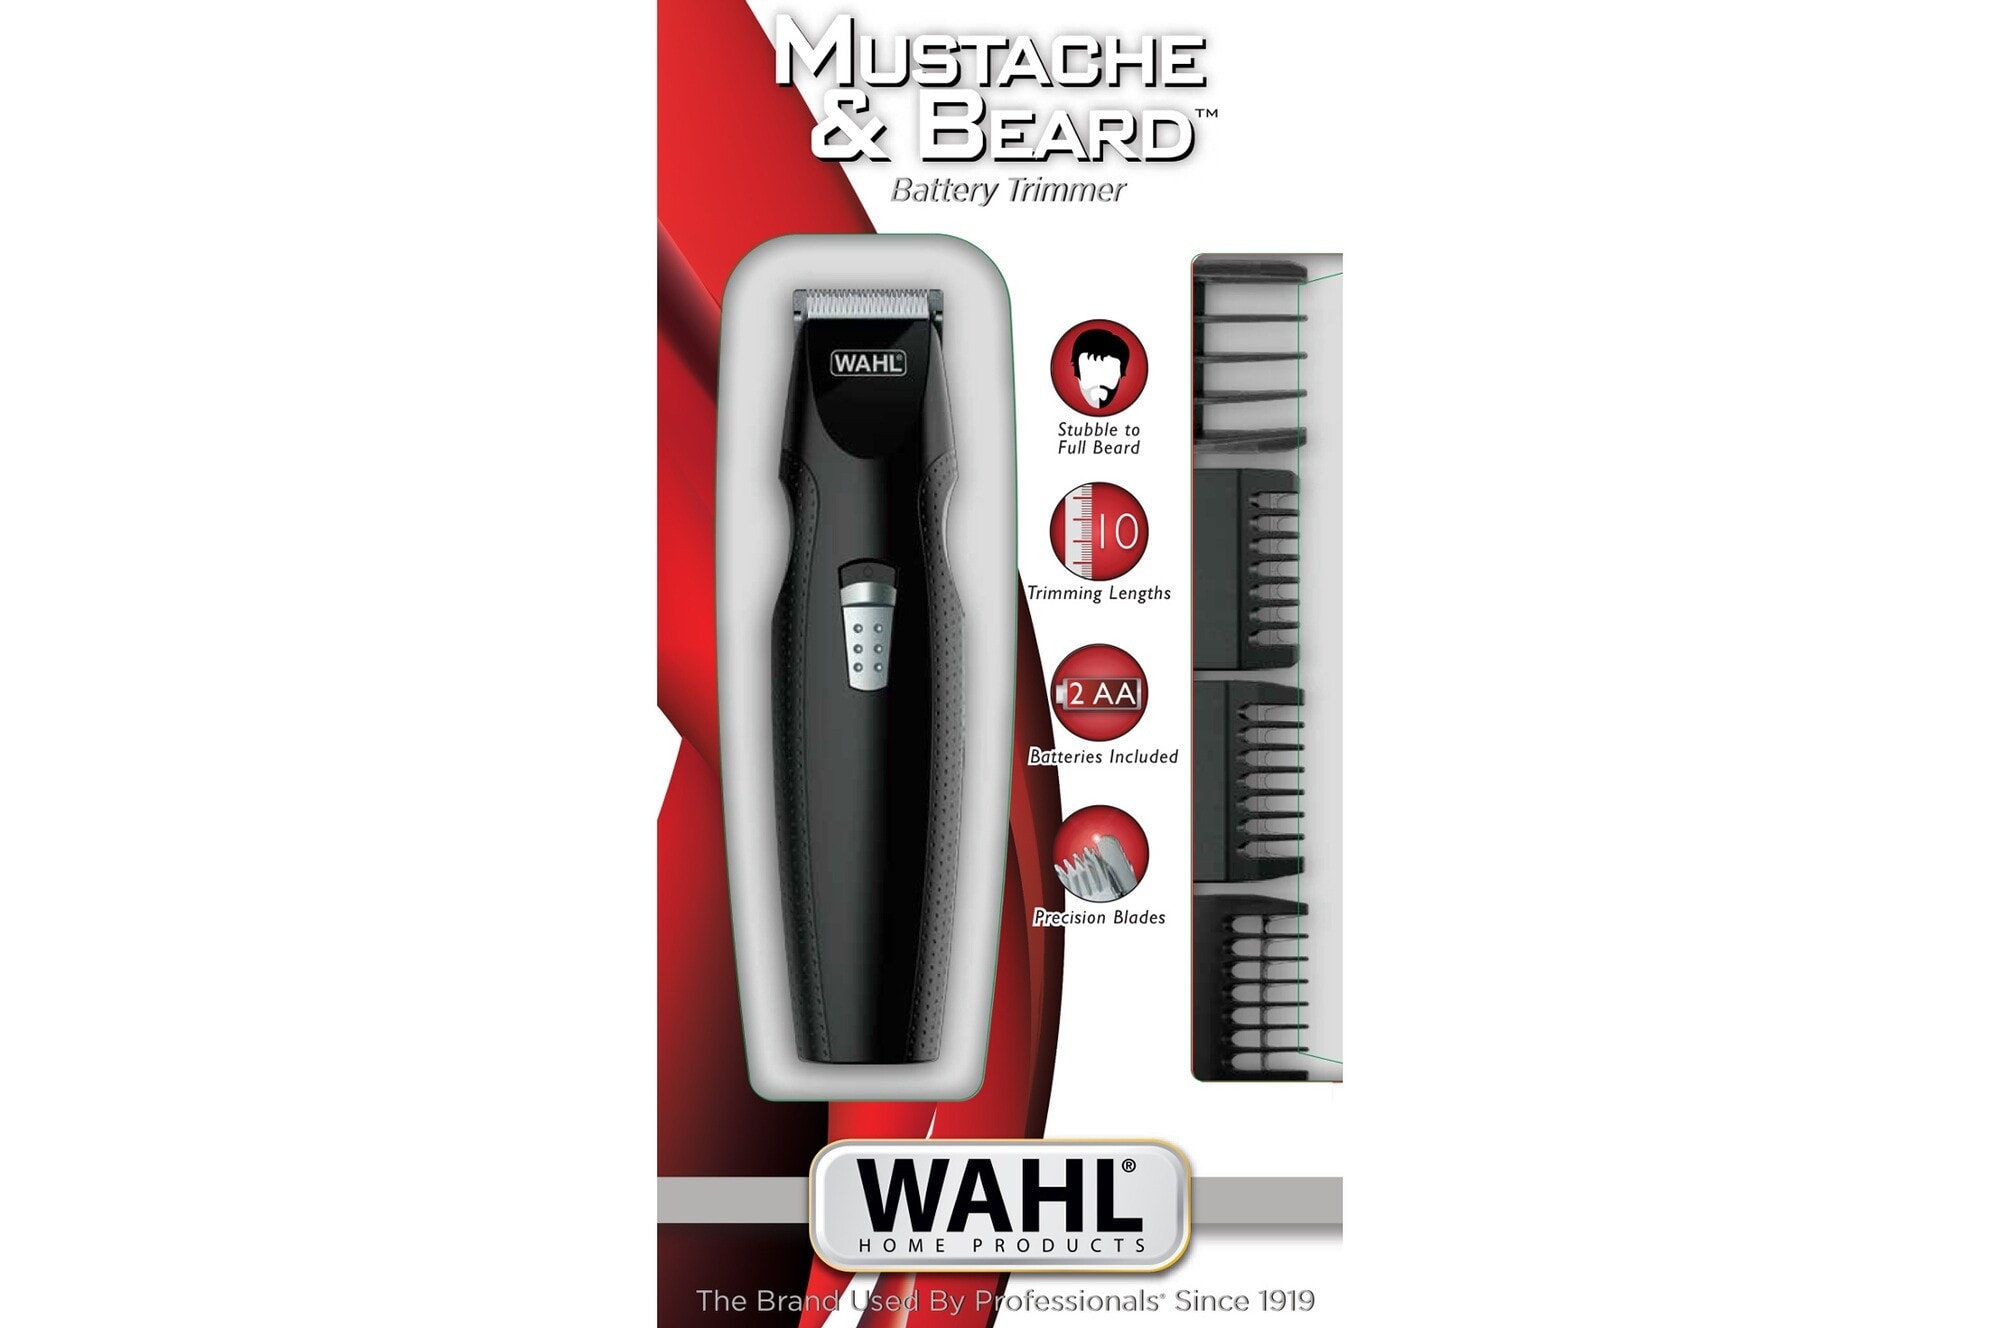 Tondeuse homme wahl mustach and beard WAHL Pas Cher 